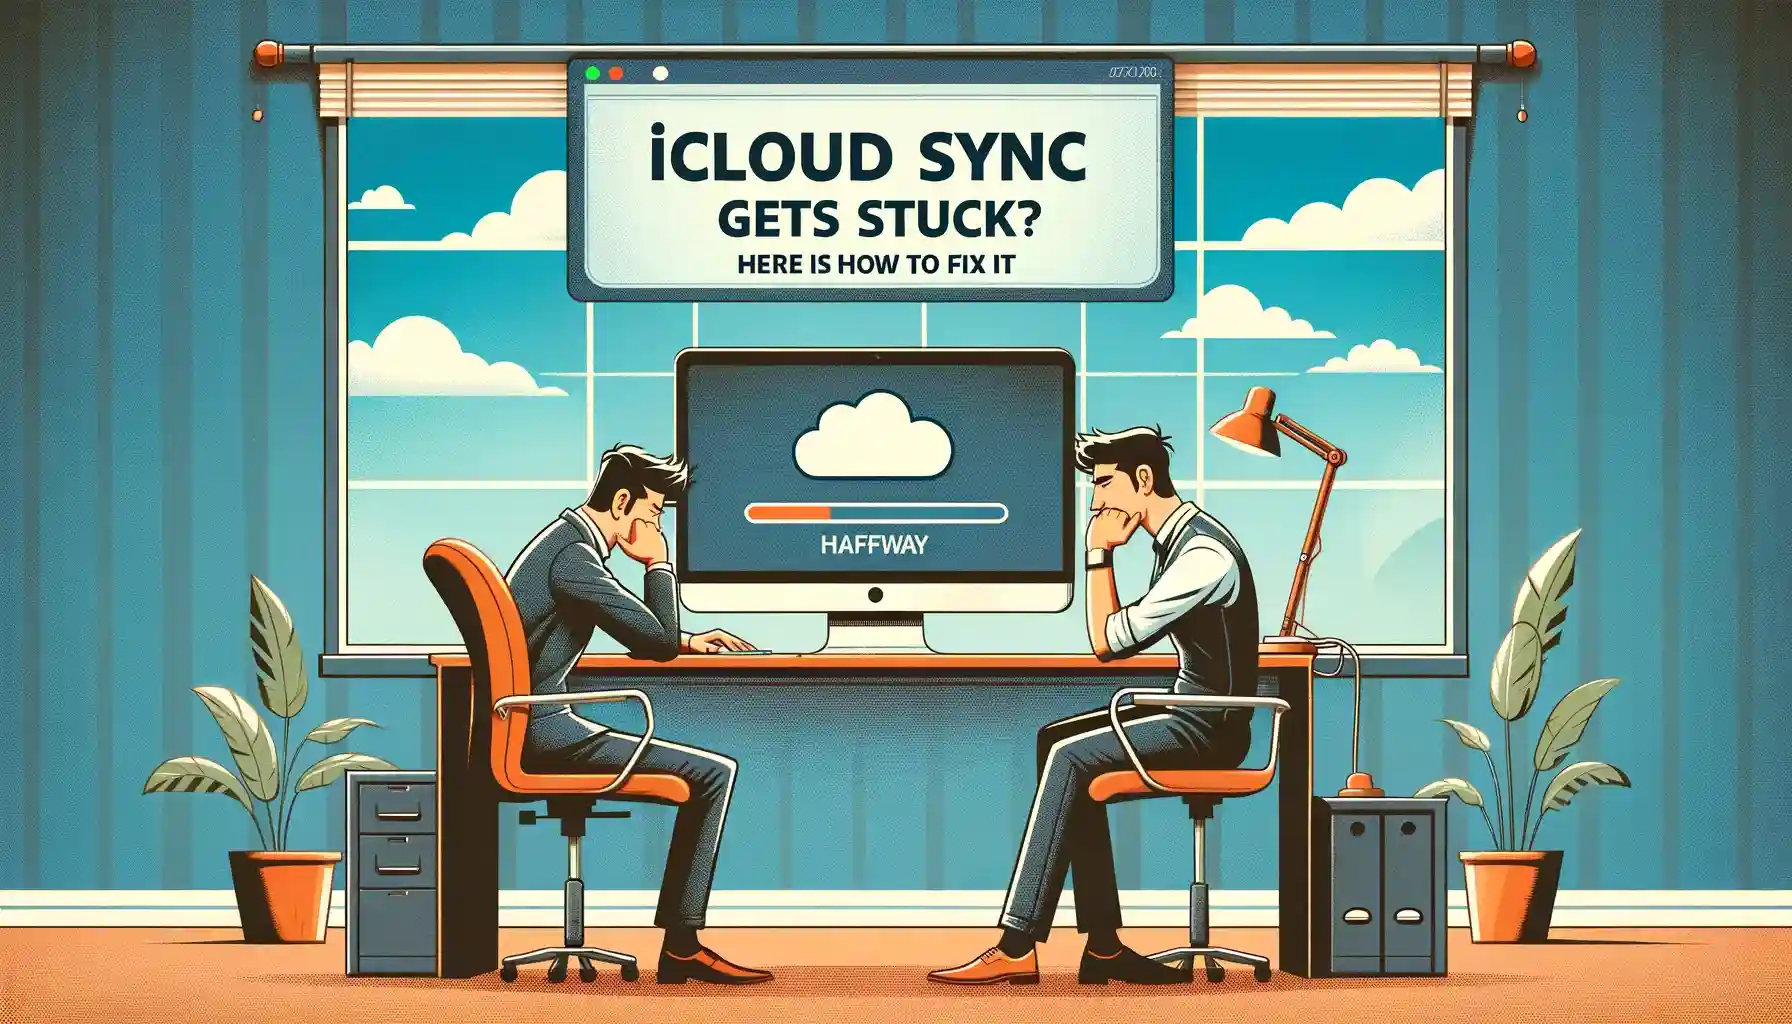 iCloud Sync Gets Stuck? Here is How to Fix it